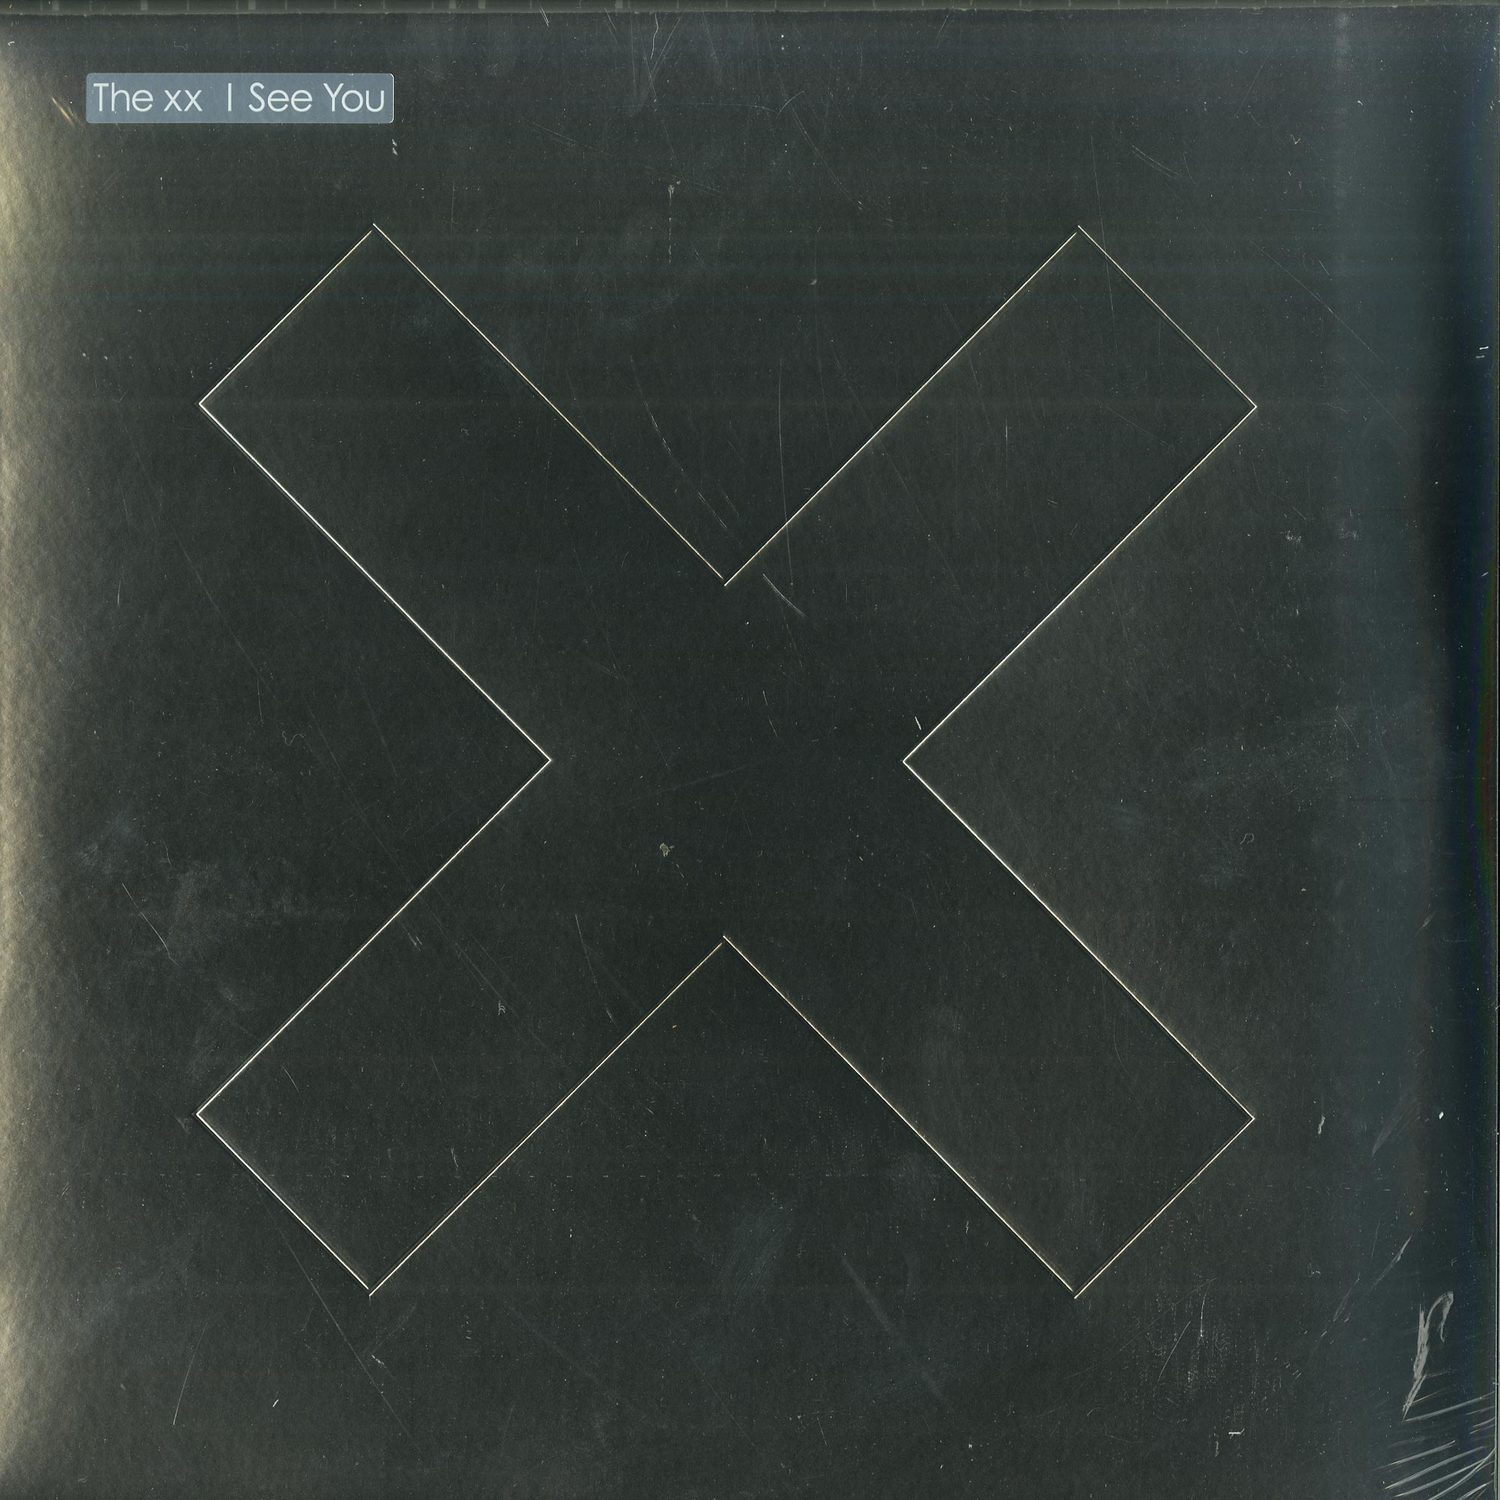 The XX - I SEE YOU 